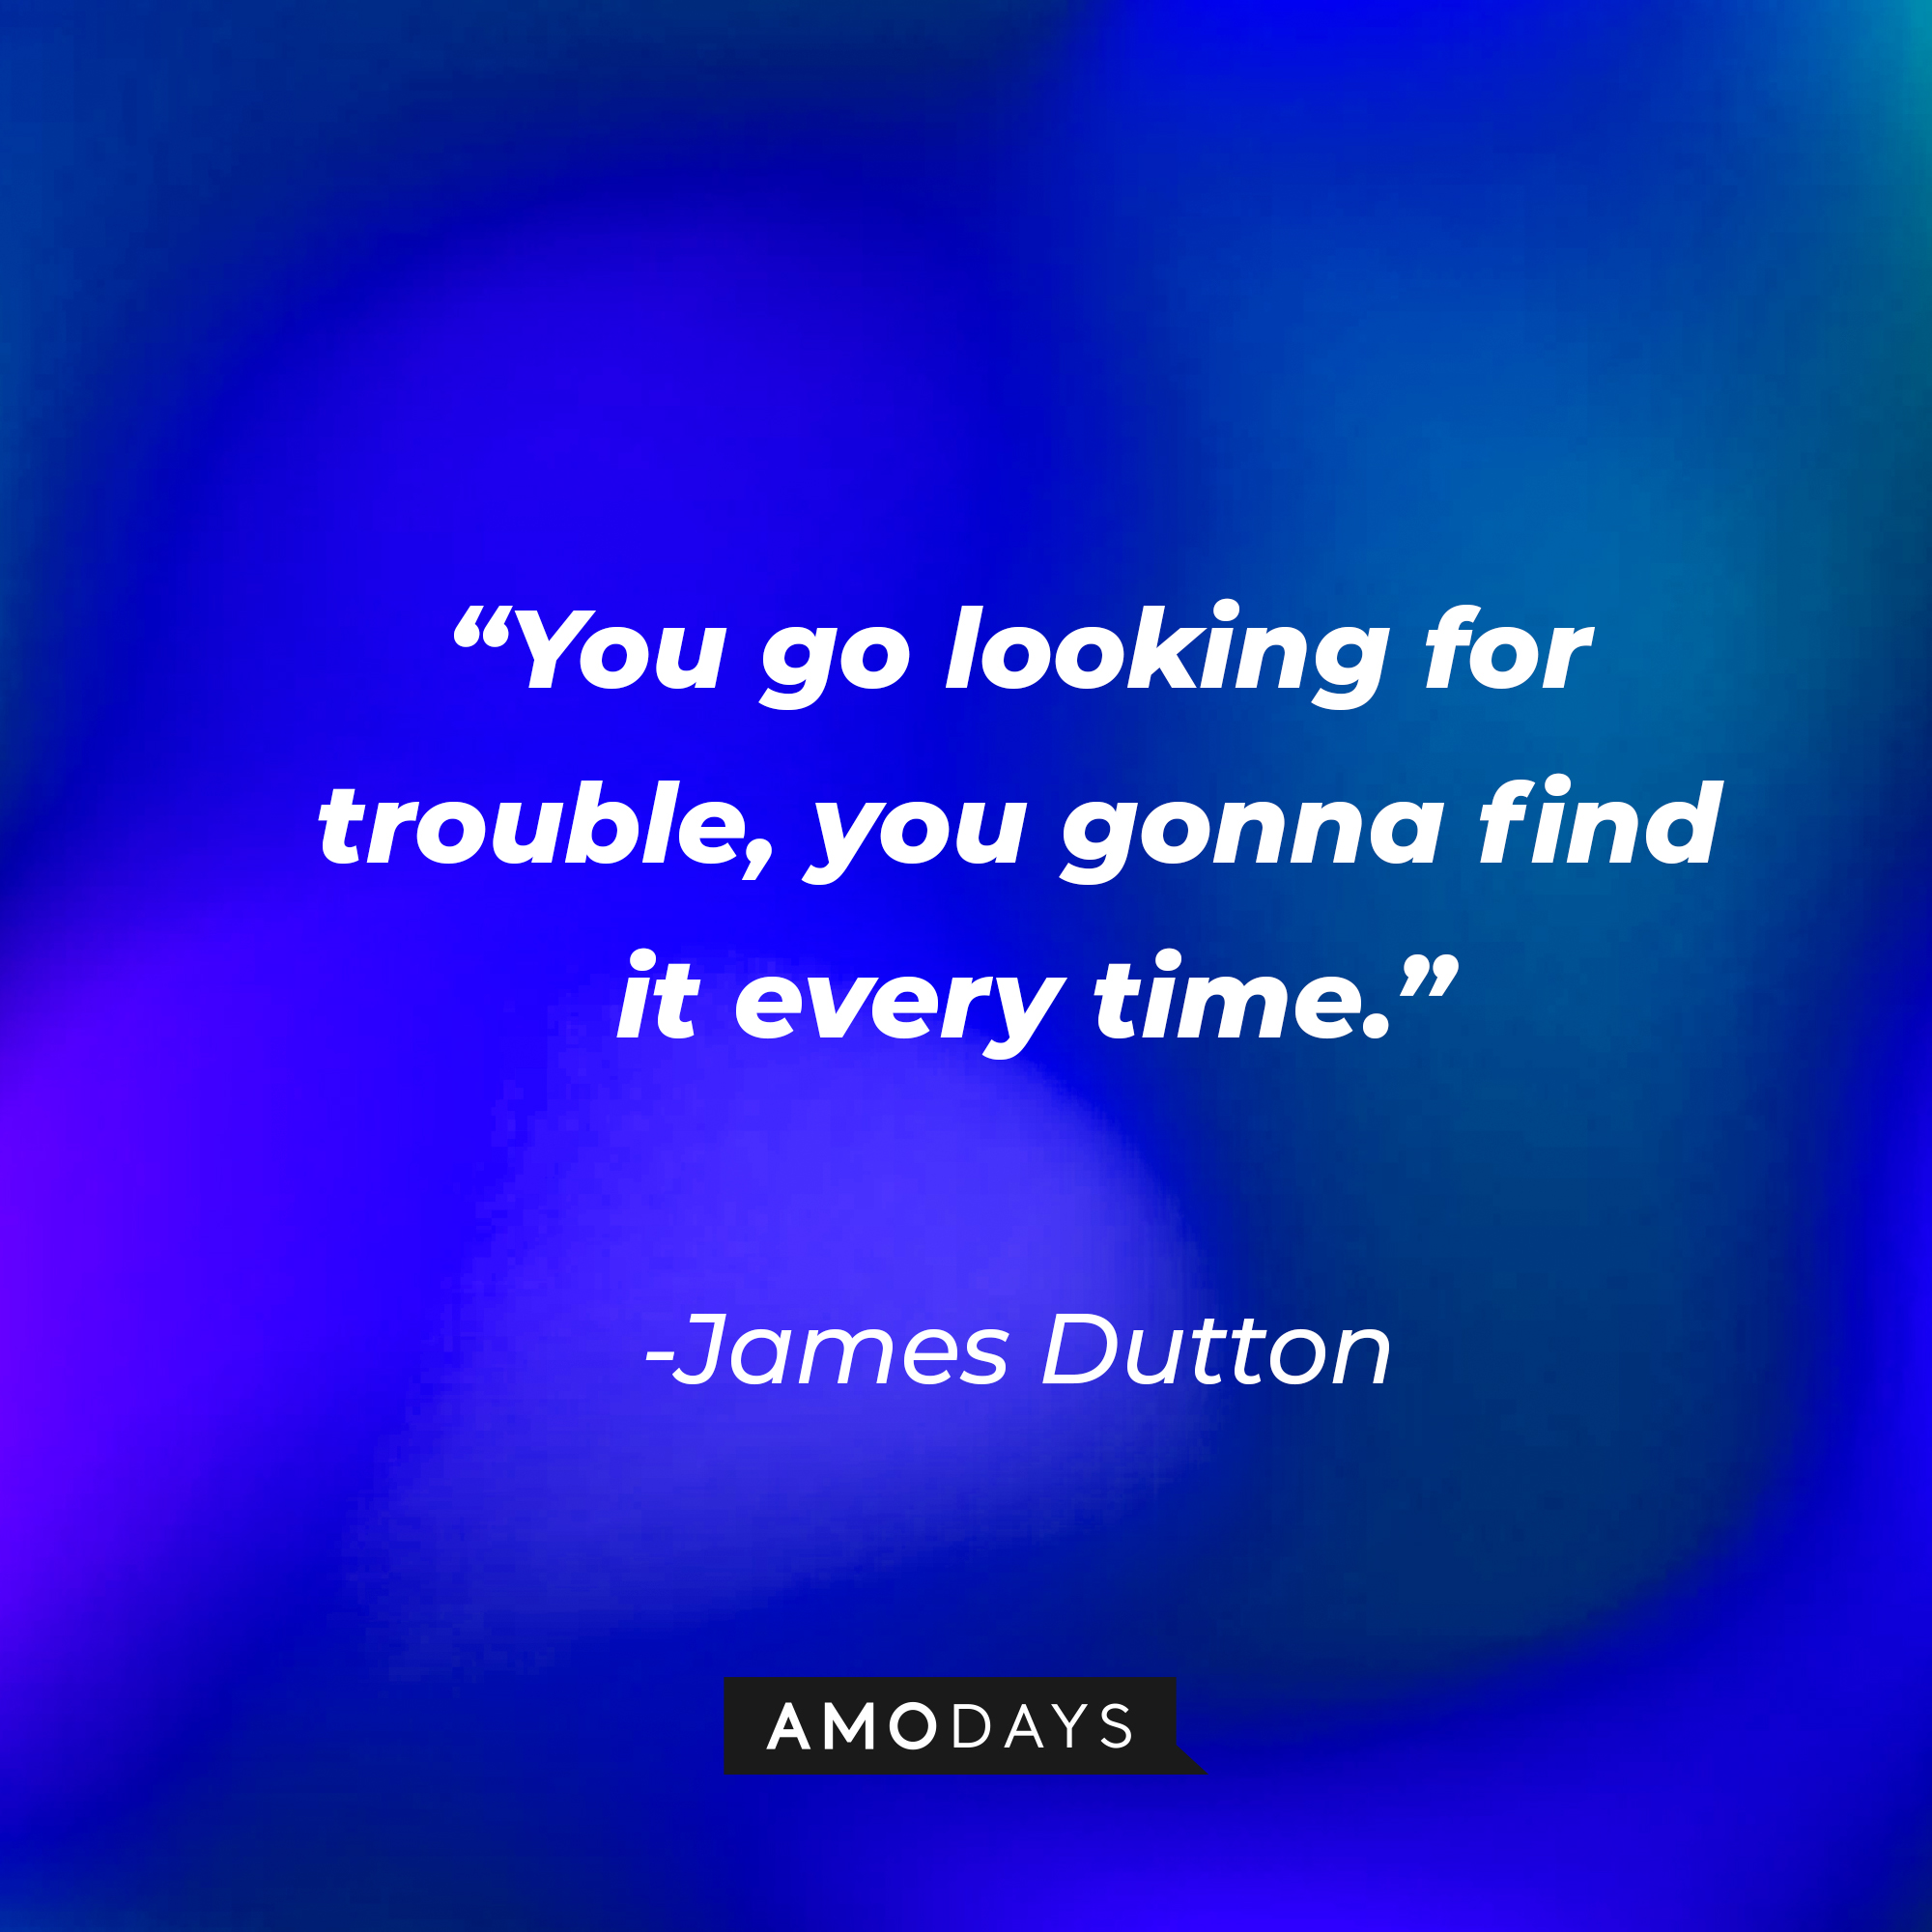 James Dutton’s quote: “You go looking for trouble, you gonna find it every time.” | Source: AmoDays